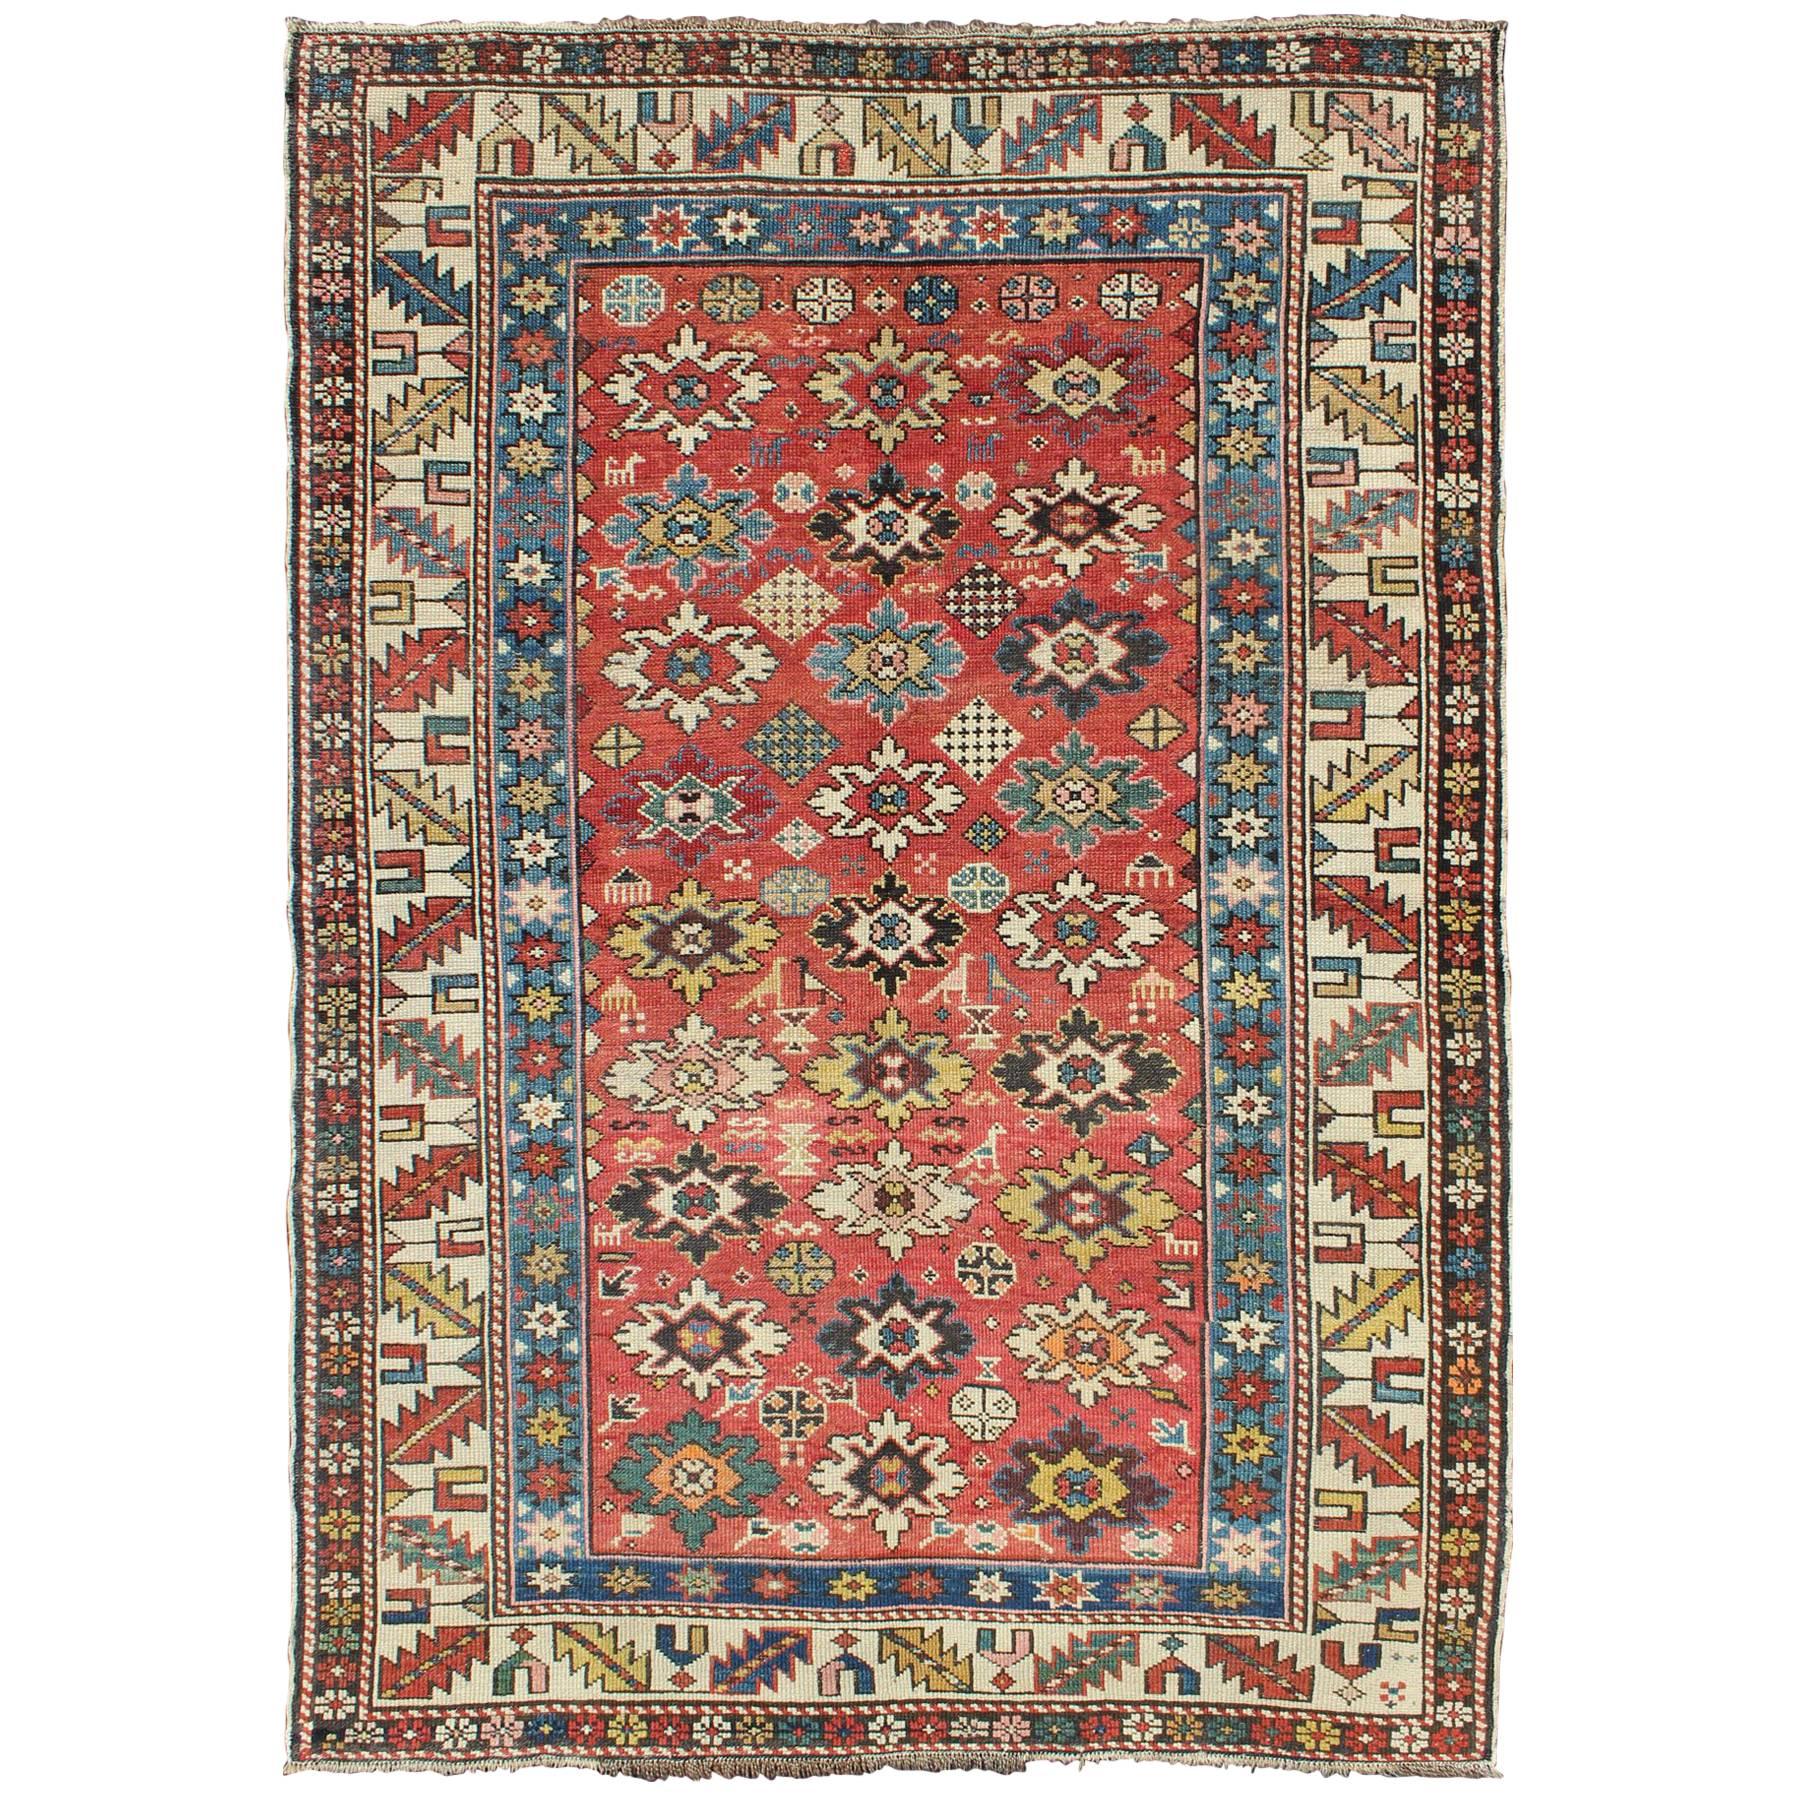 Antique Caucasian Shirvan Rug with All-Over Blossom Pattern & Vibrant Colors